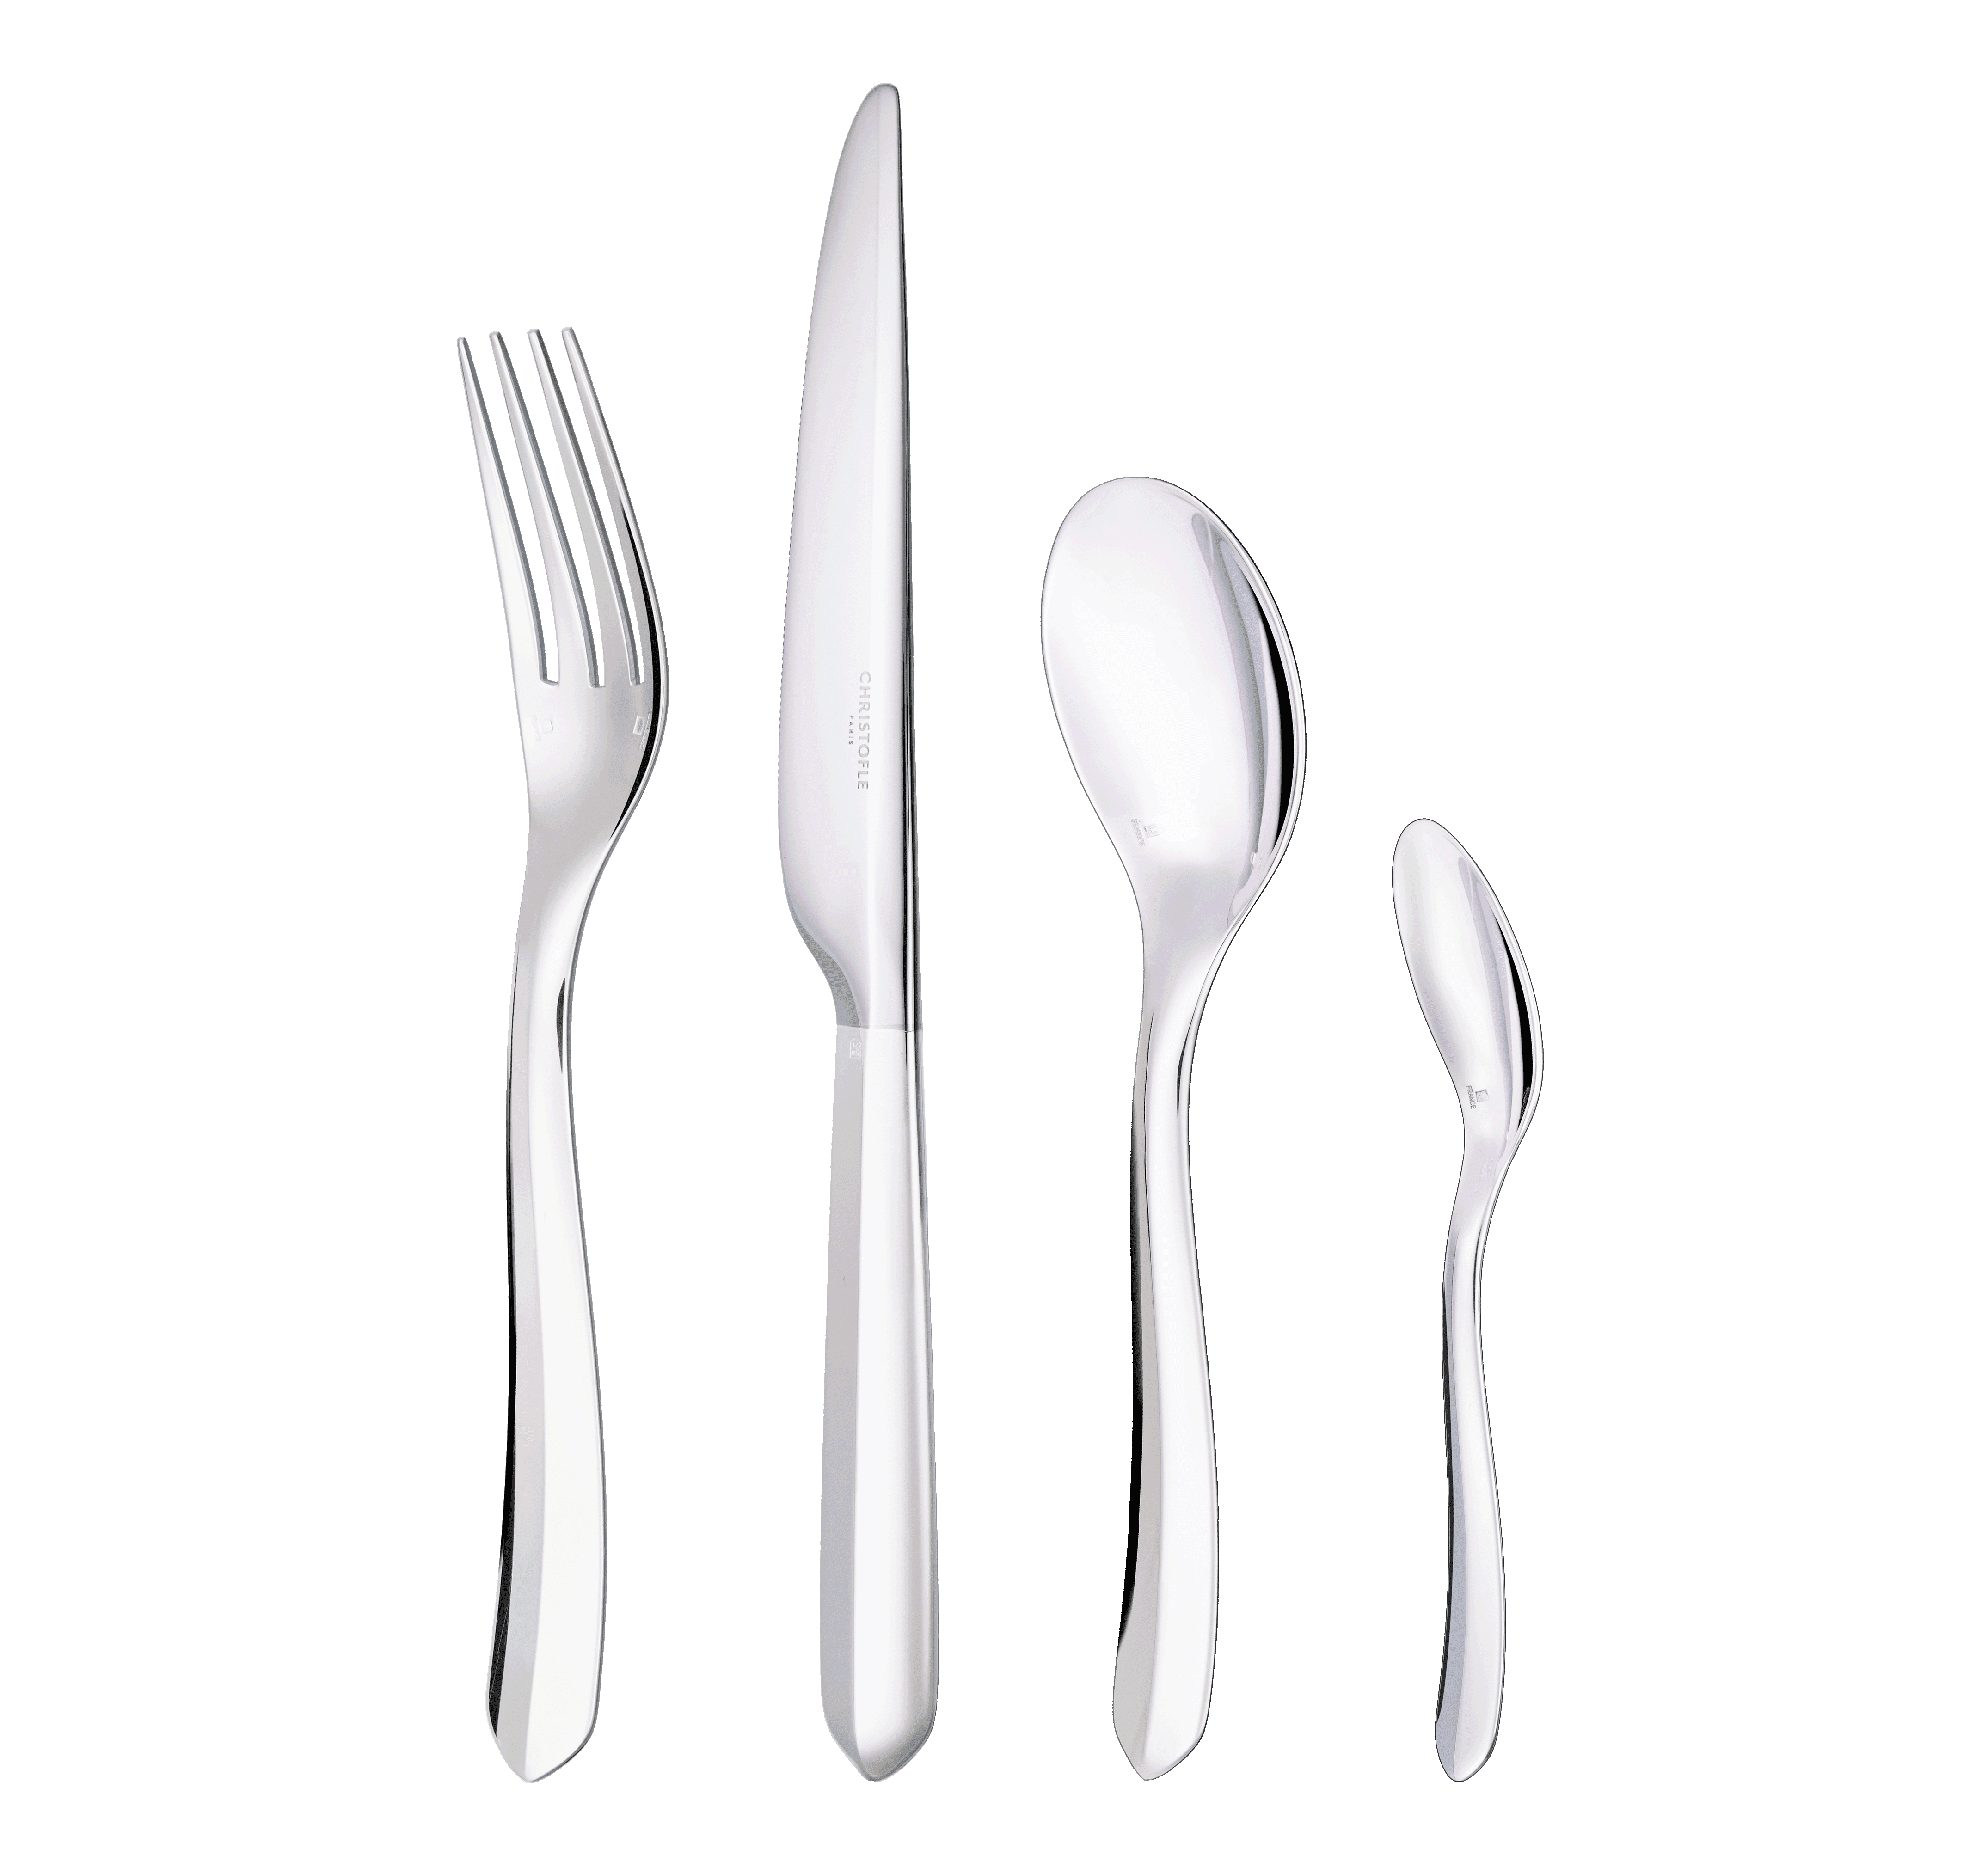 Free Shipping on Vintage 48-Piece Engraved Flatware Set Stainless